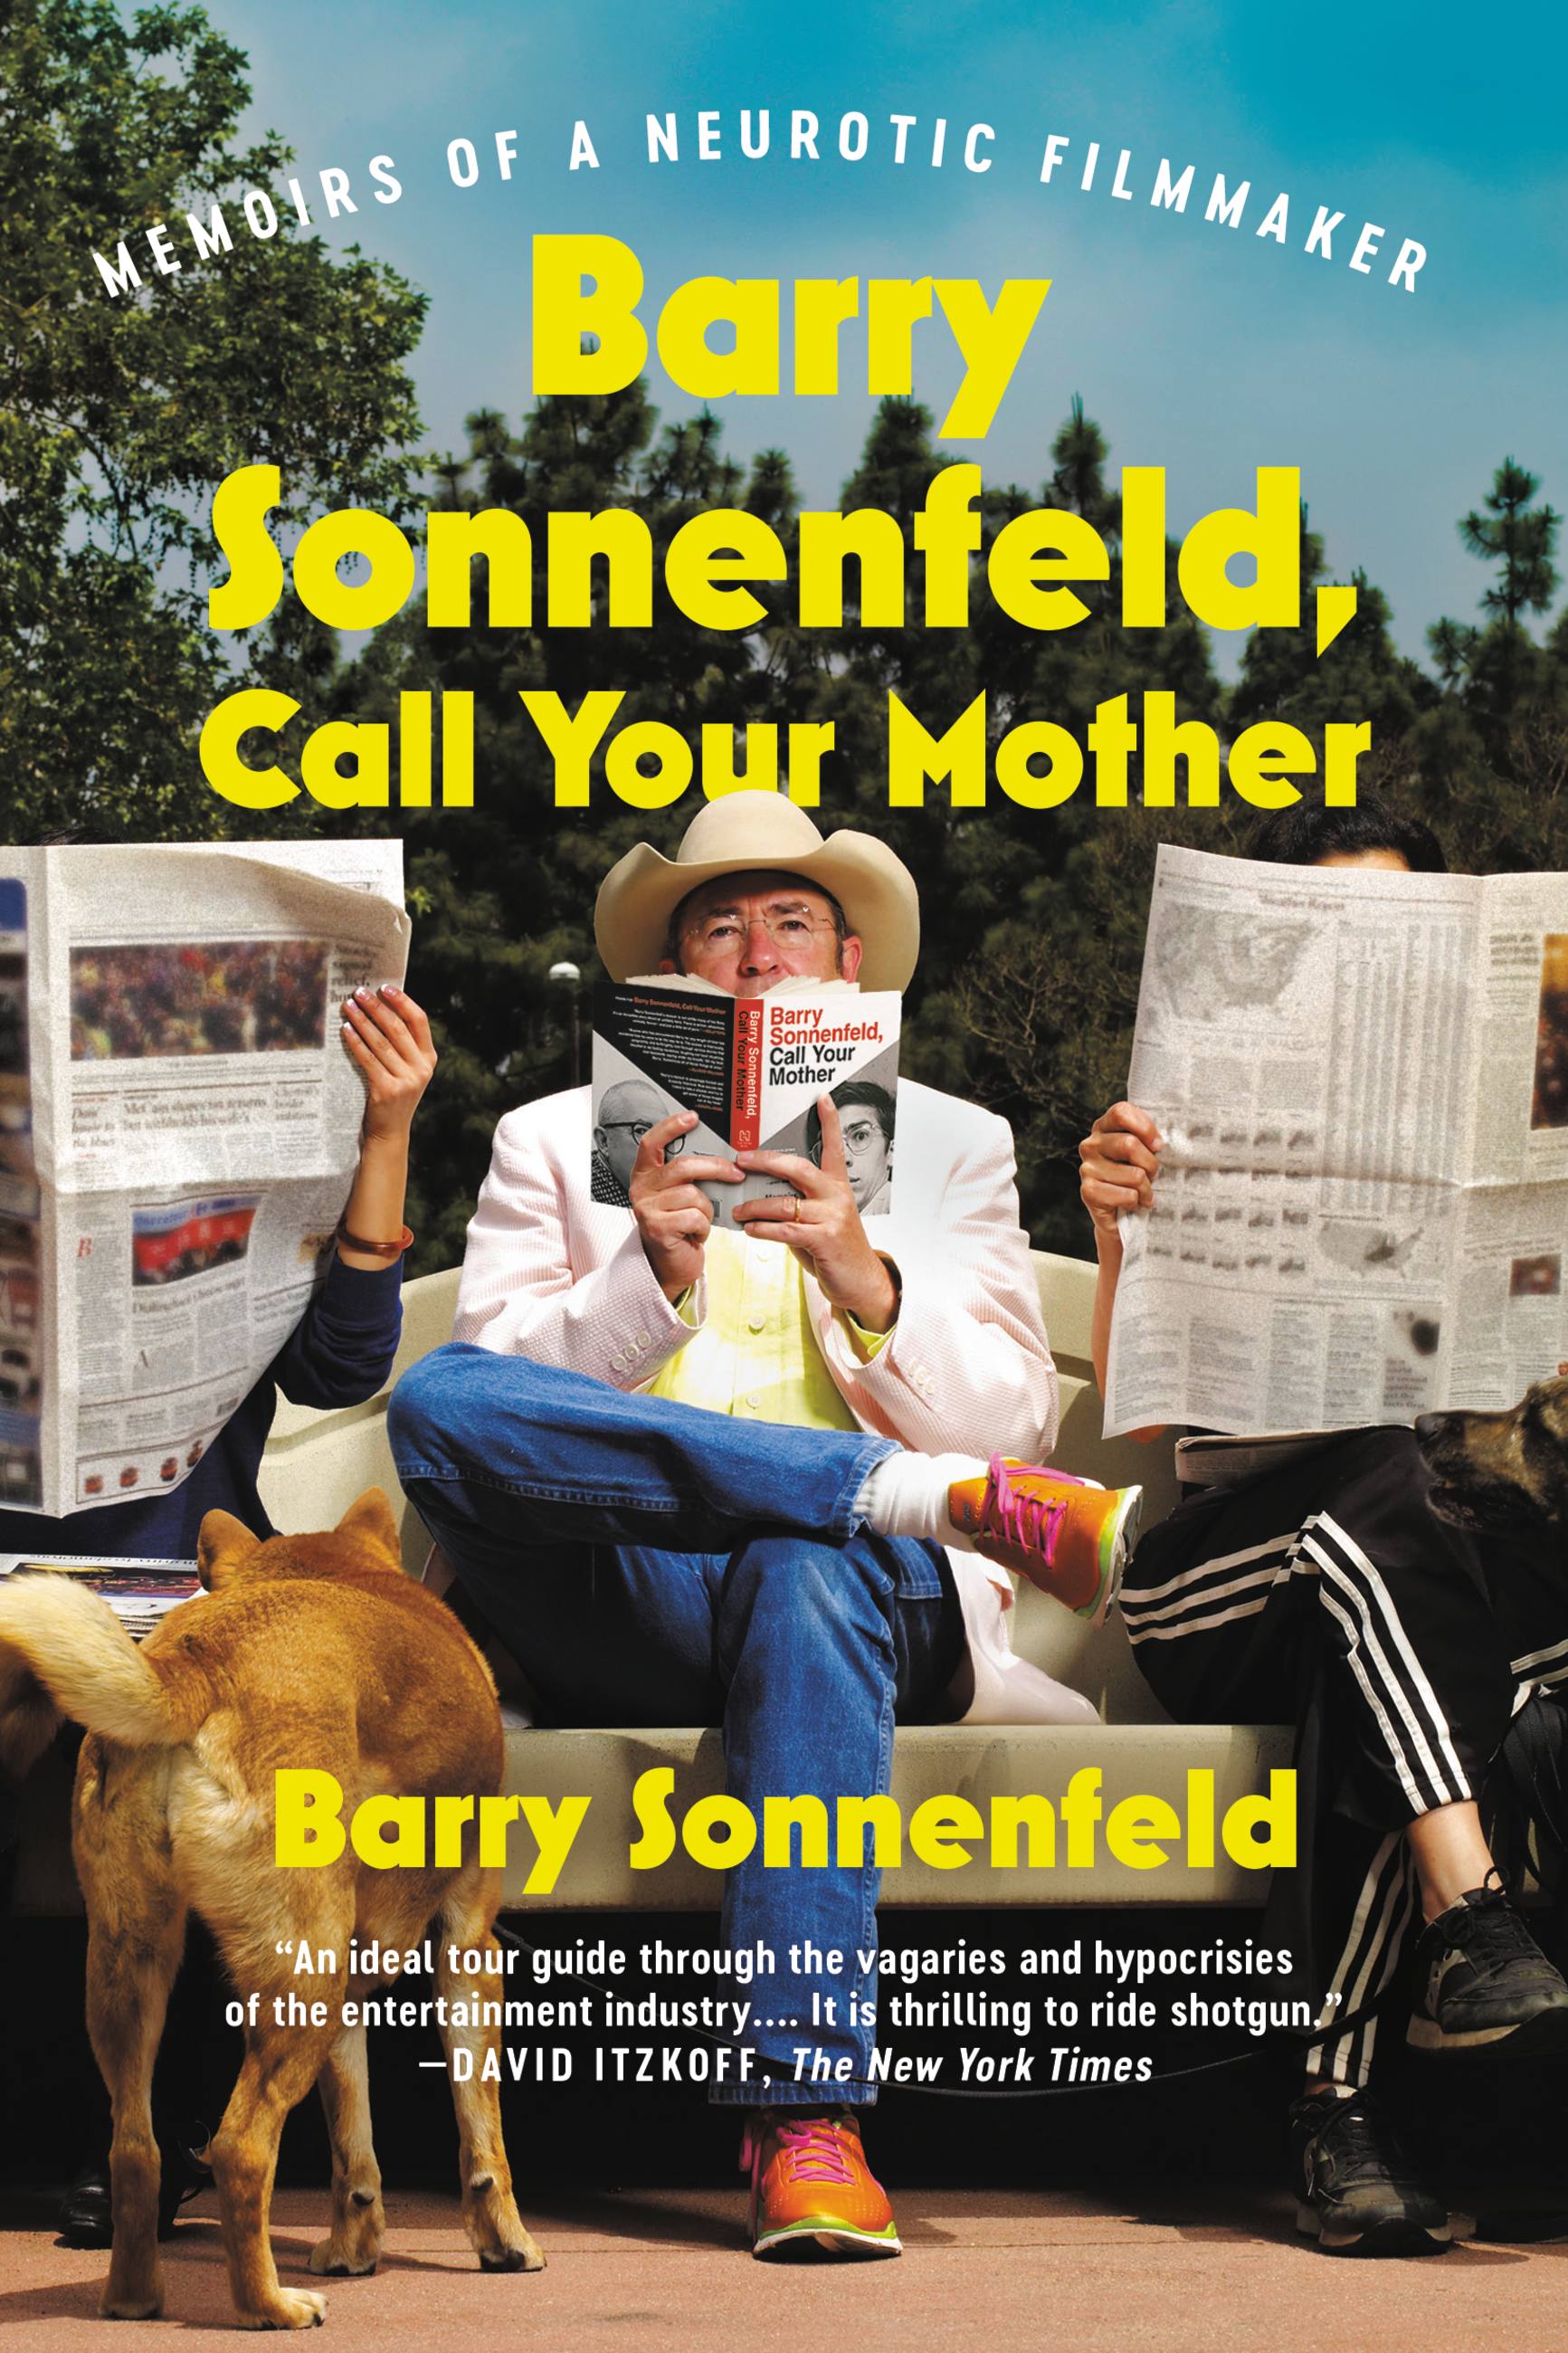 Barry Sonnenfeld, Call Your Mother by Barry Sonnenfeld | Hachette